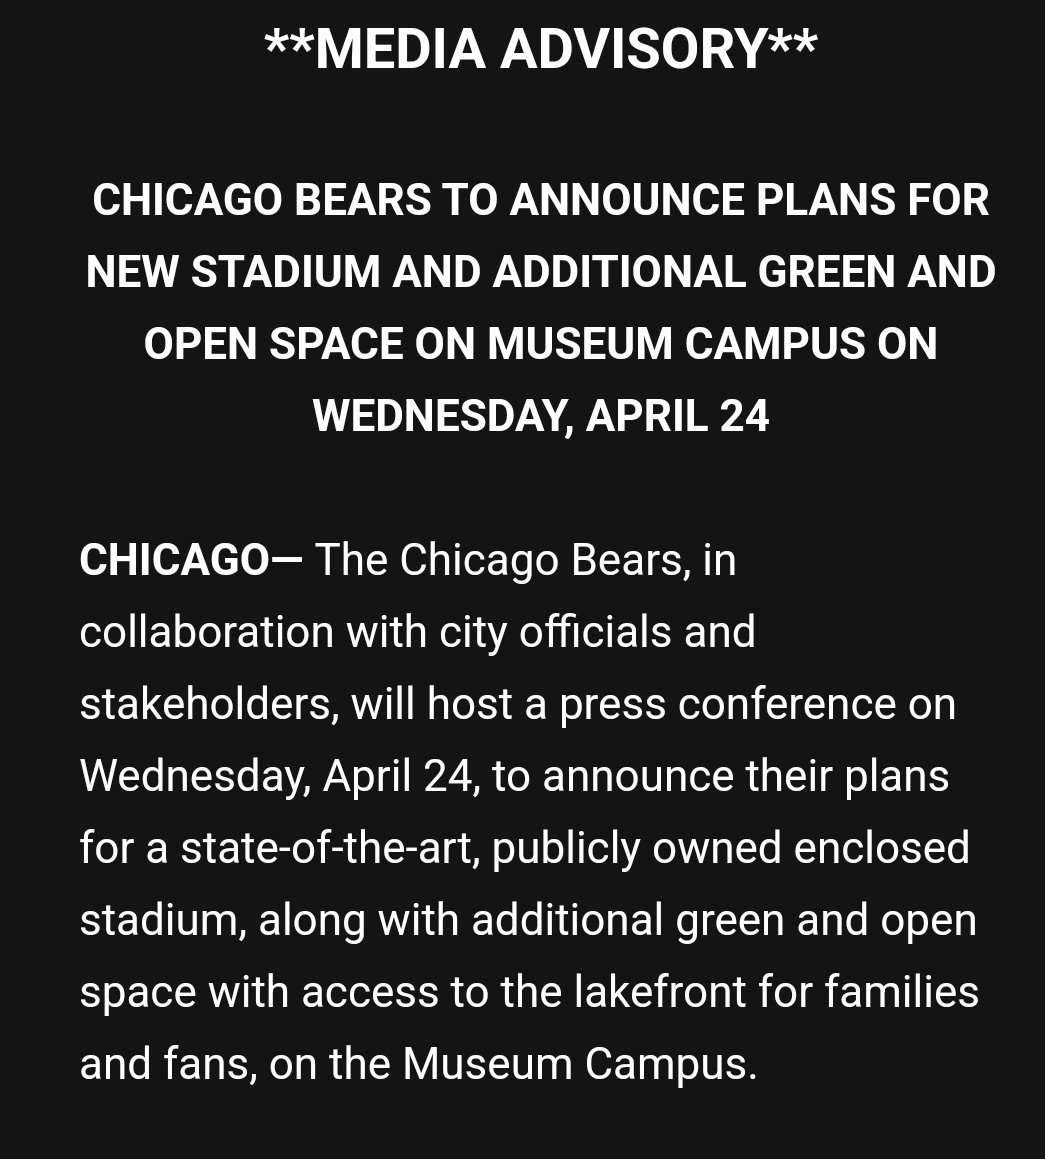 The #Bears will hold a press conference on Wednesday to announce plans for a new publicly owned stadium on the lakefront: